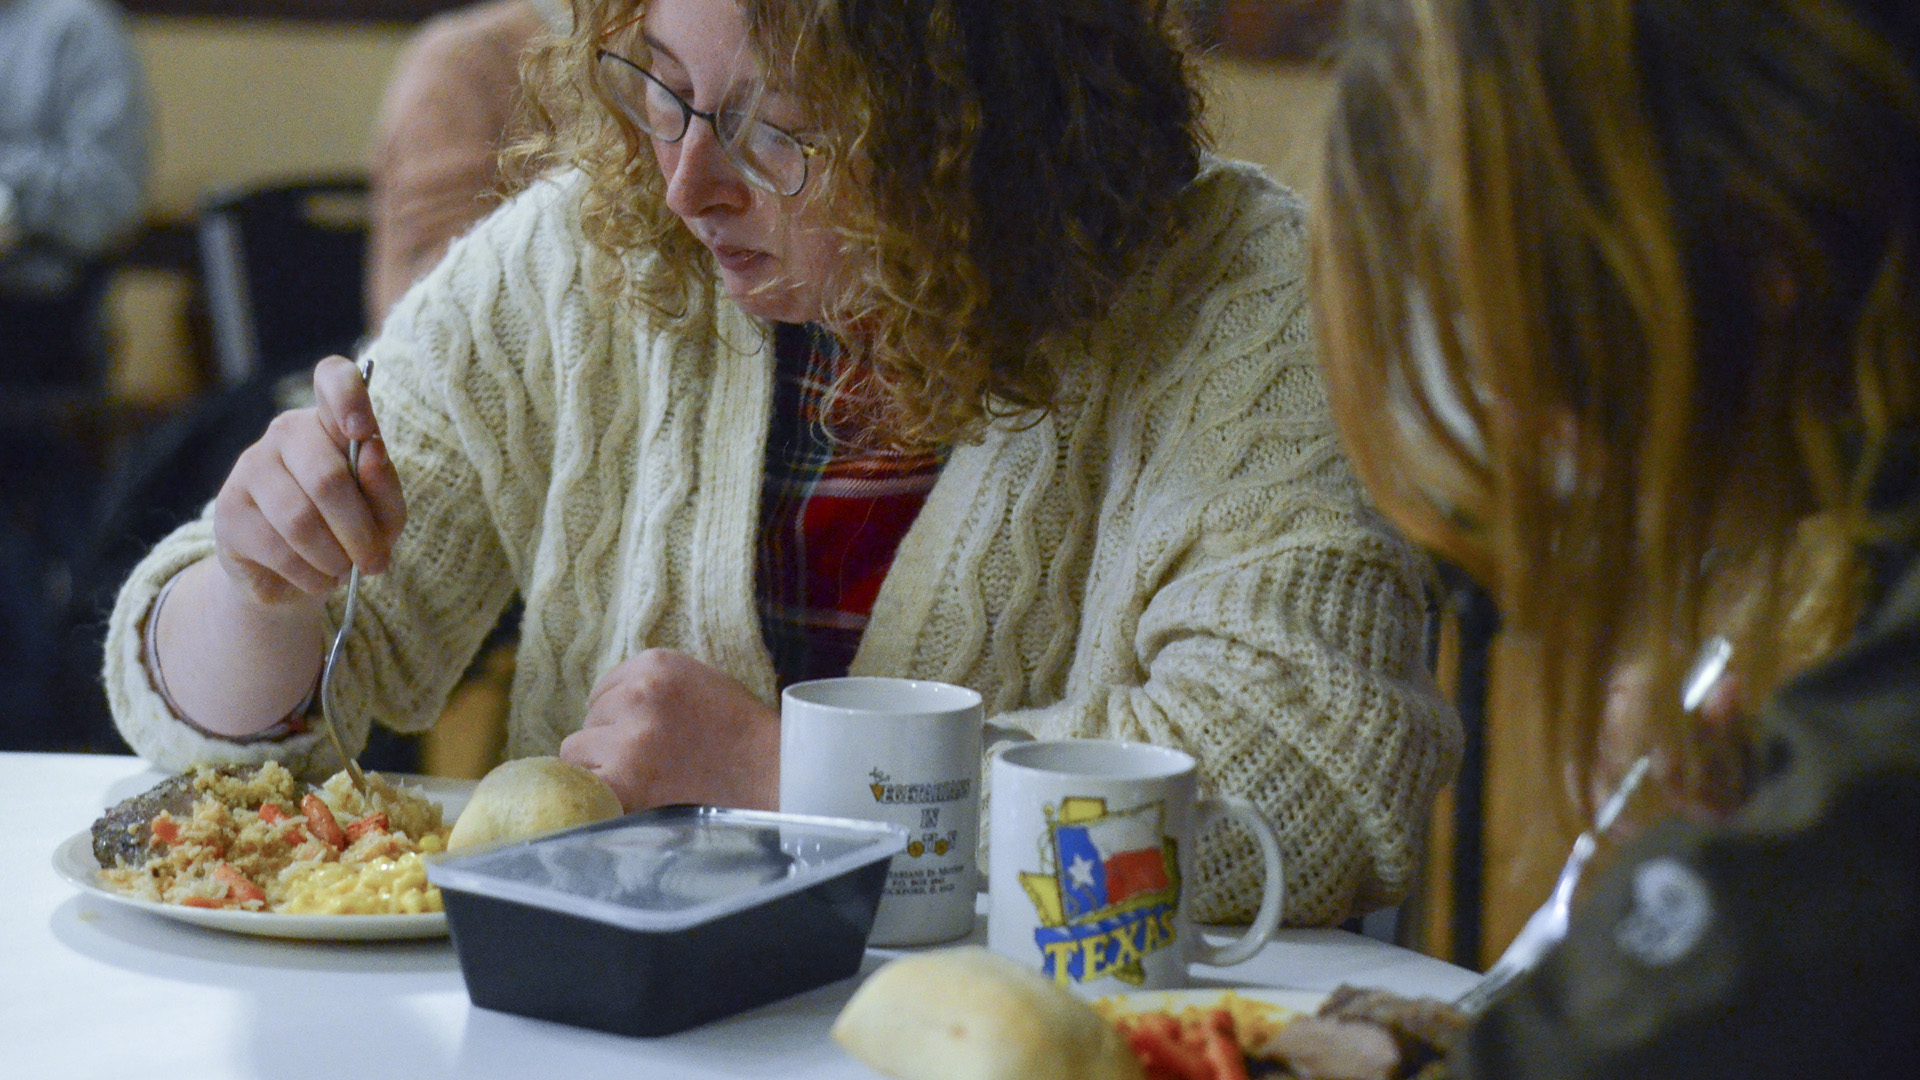 Thea Sutter sits at a table and eats from a food-covered plate that sits on a table next to a disposable to-go container, two coffee mugs and another plate of food, with another person in profile in the foreground.